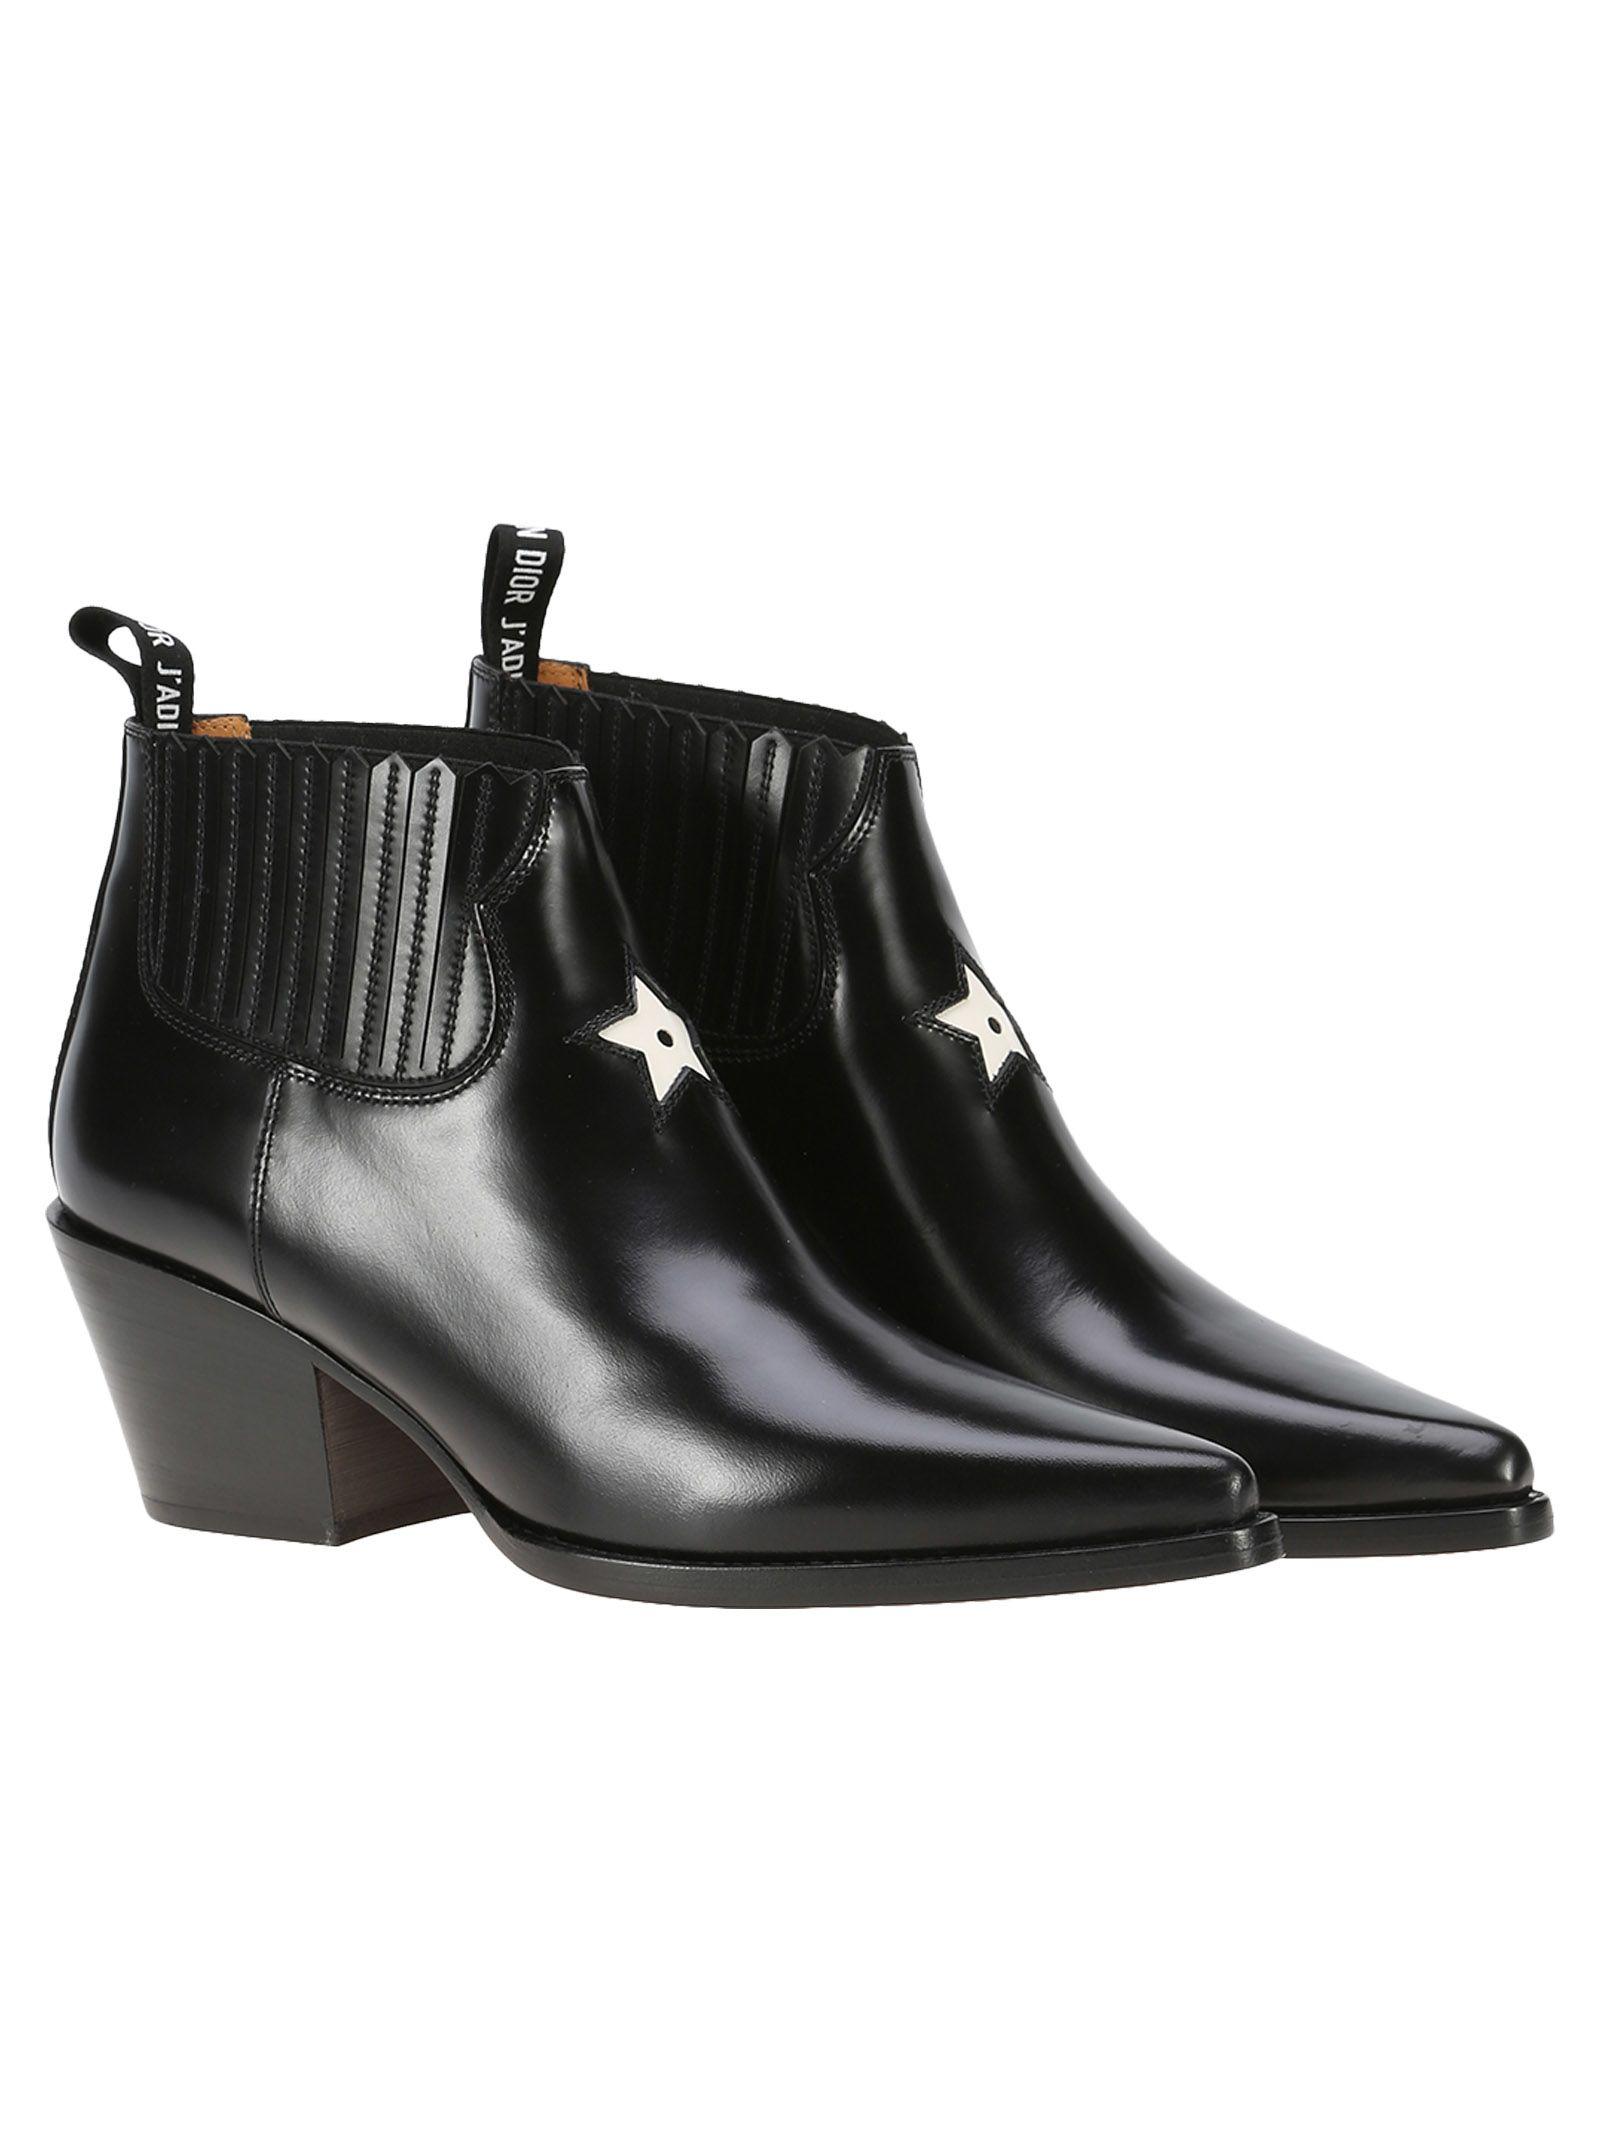 Dior Star Ankle Cowboy Boots In Black 